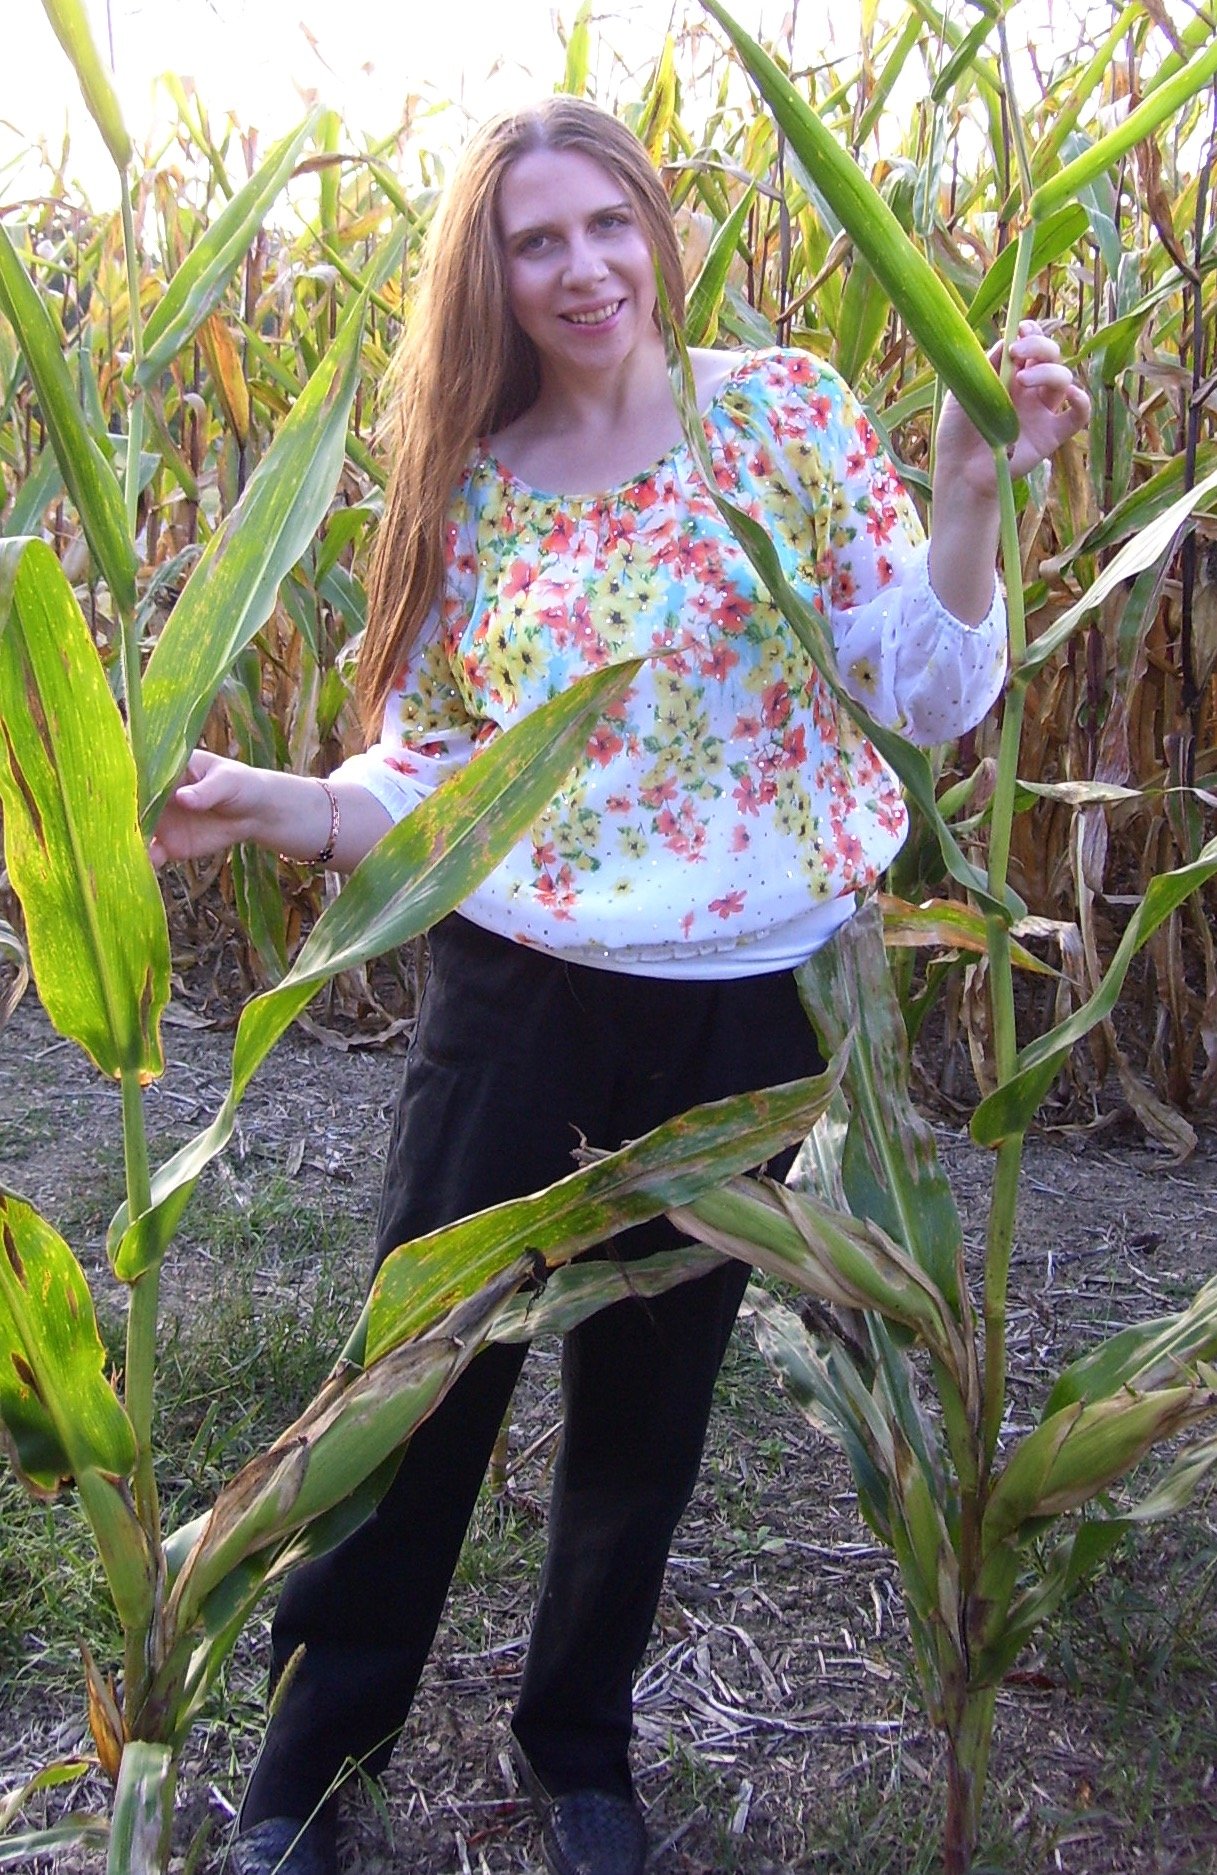 Standing in the Cornfield